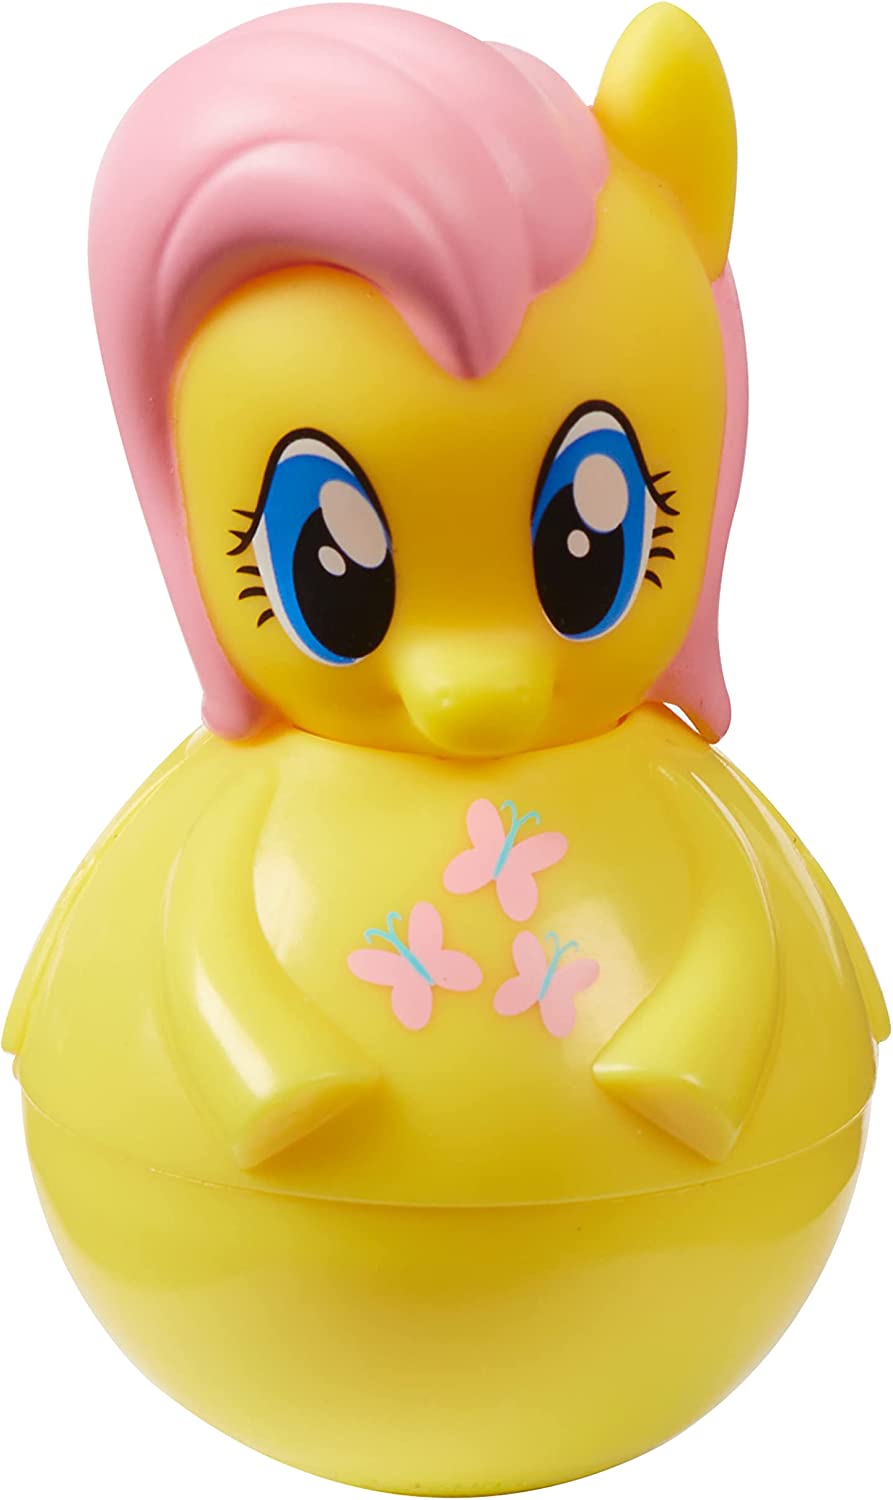 MLP Fluttershy Character Wobble Toy 1